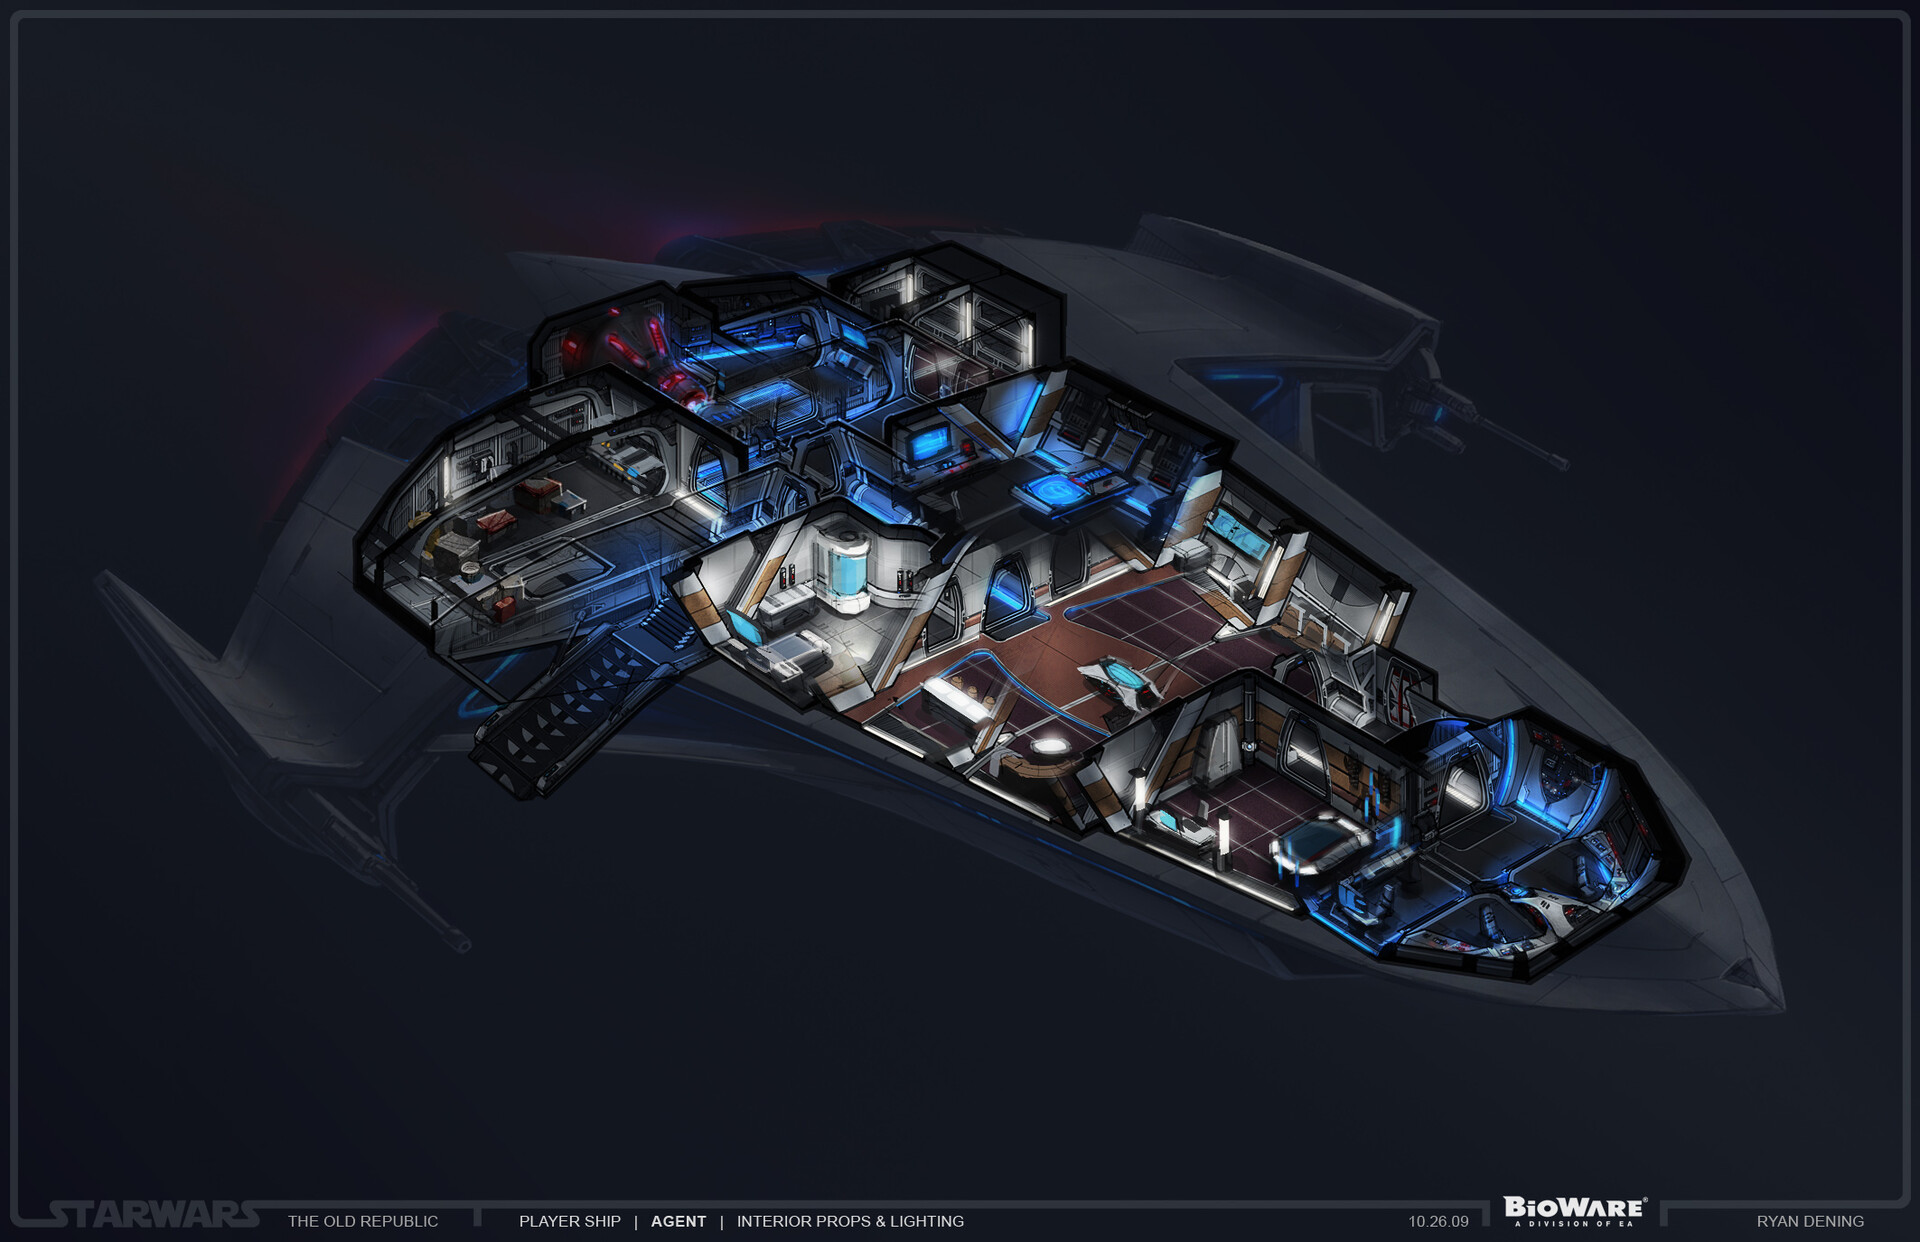 Imperial Agent's player ship from "Star Wars: The Old Republic&qu...